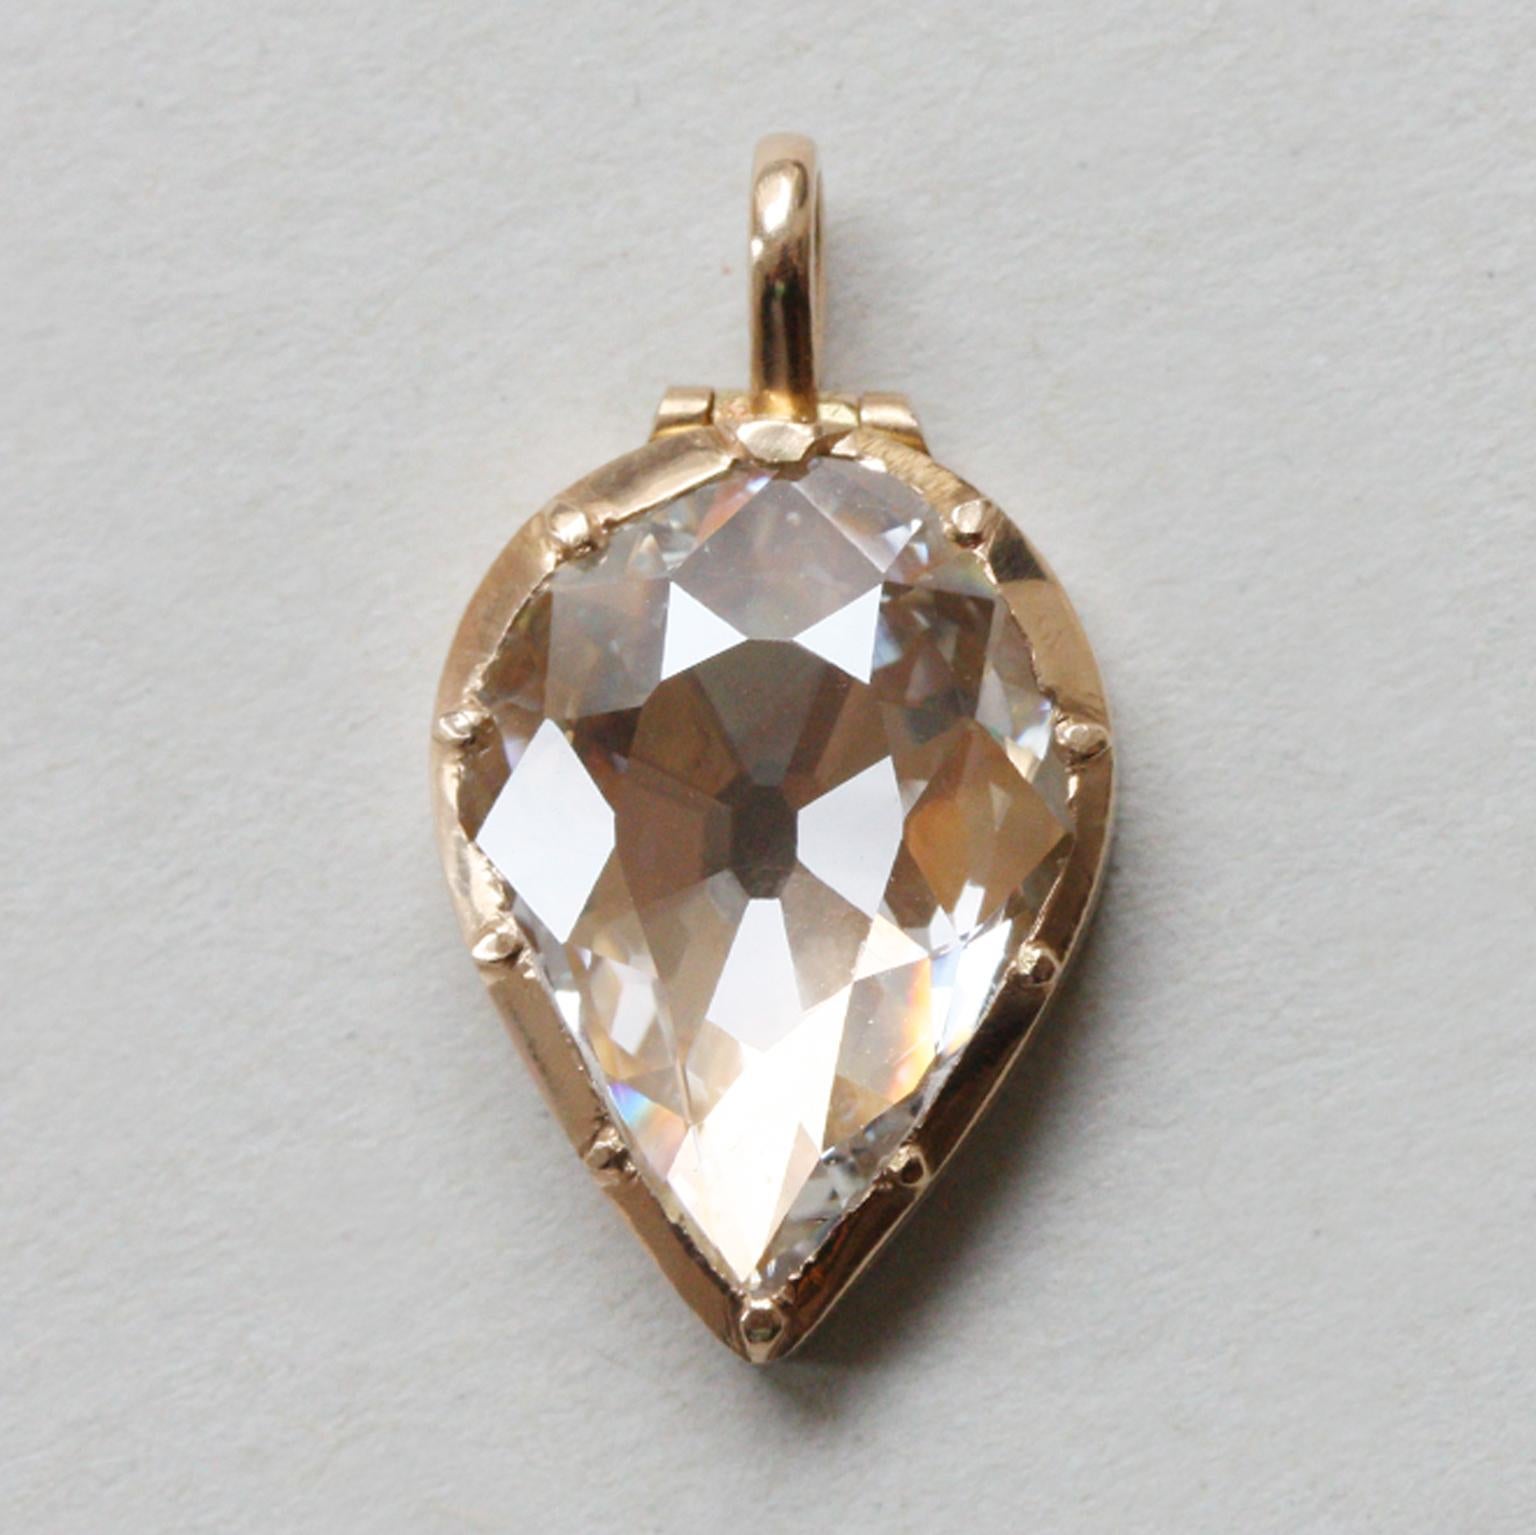 An 18 carat gold locket pendant set with a large and flat old cut pear shaped diamond (3.13 carat, J) in the lid of the locket which opens to reveal a small empty locket compartment where you can keep a tiny memento or miniature image, modern